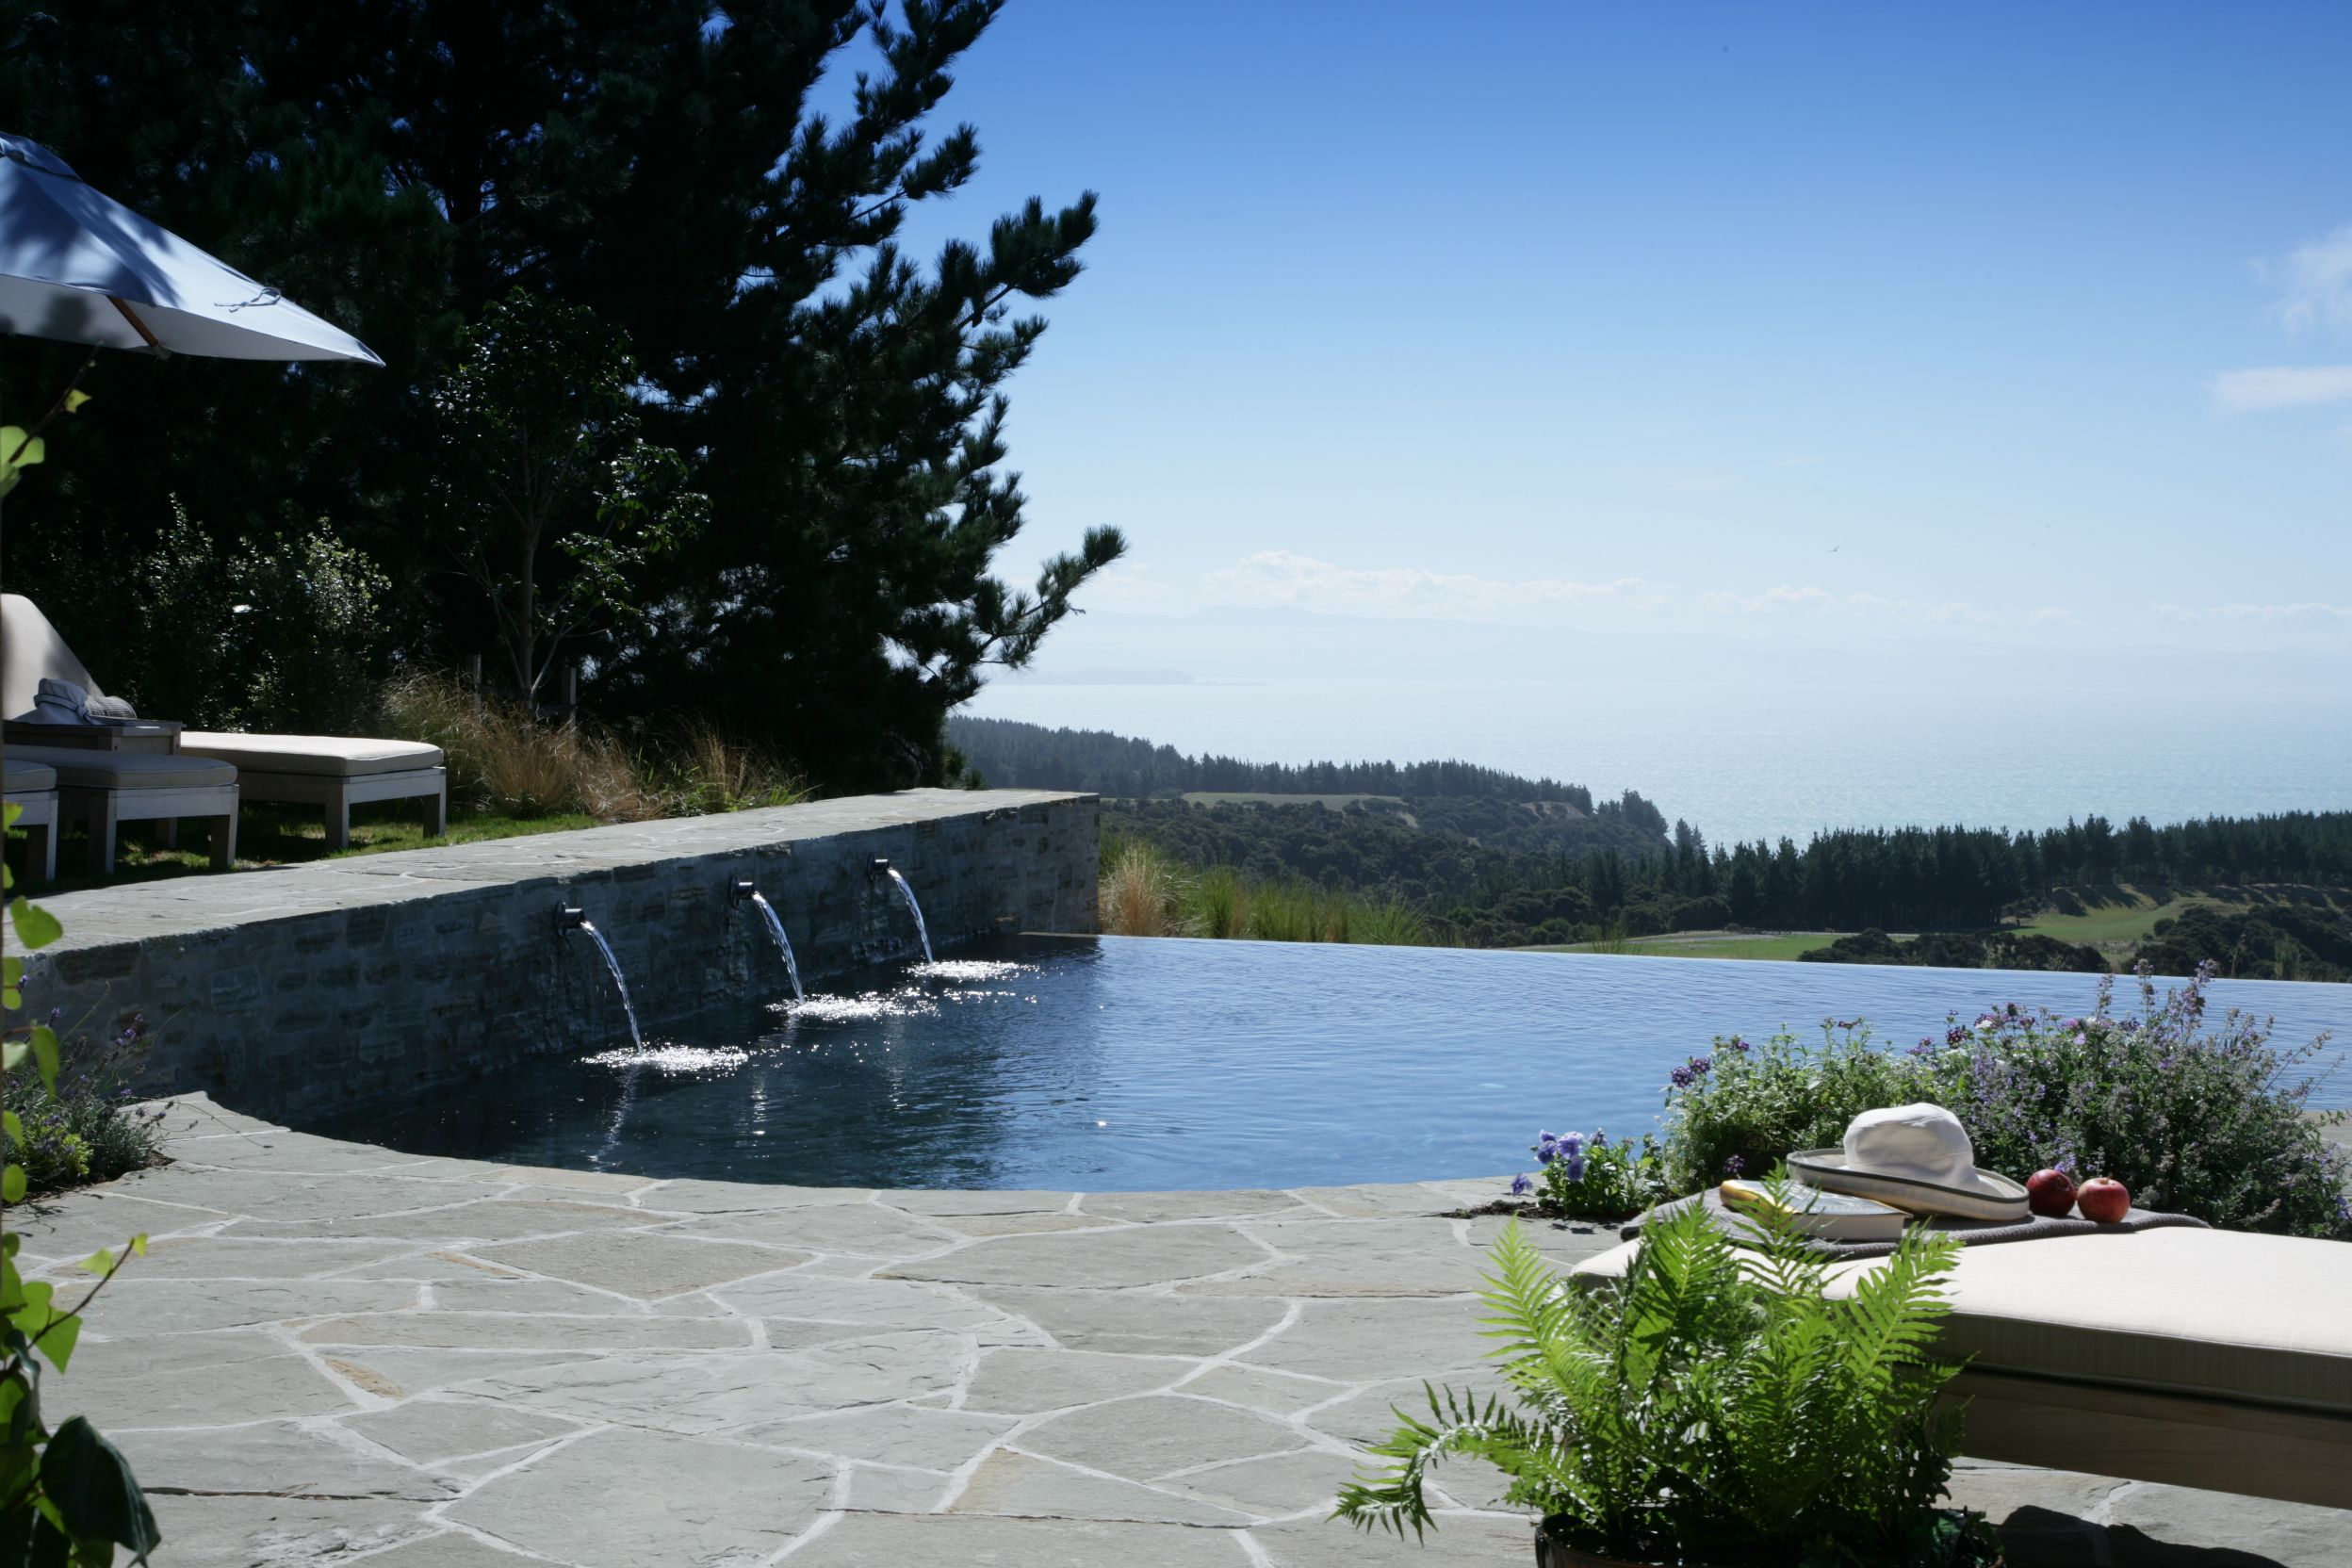 Infinity Pool at Cape Kidnappers, New Zealand ©Farm at Cape Kidnappers